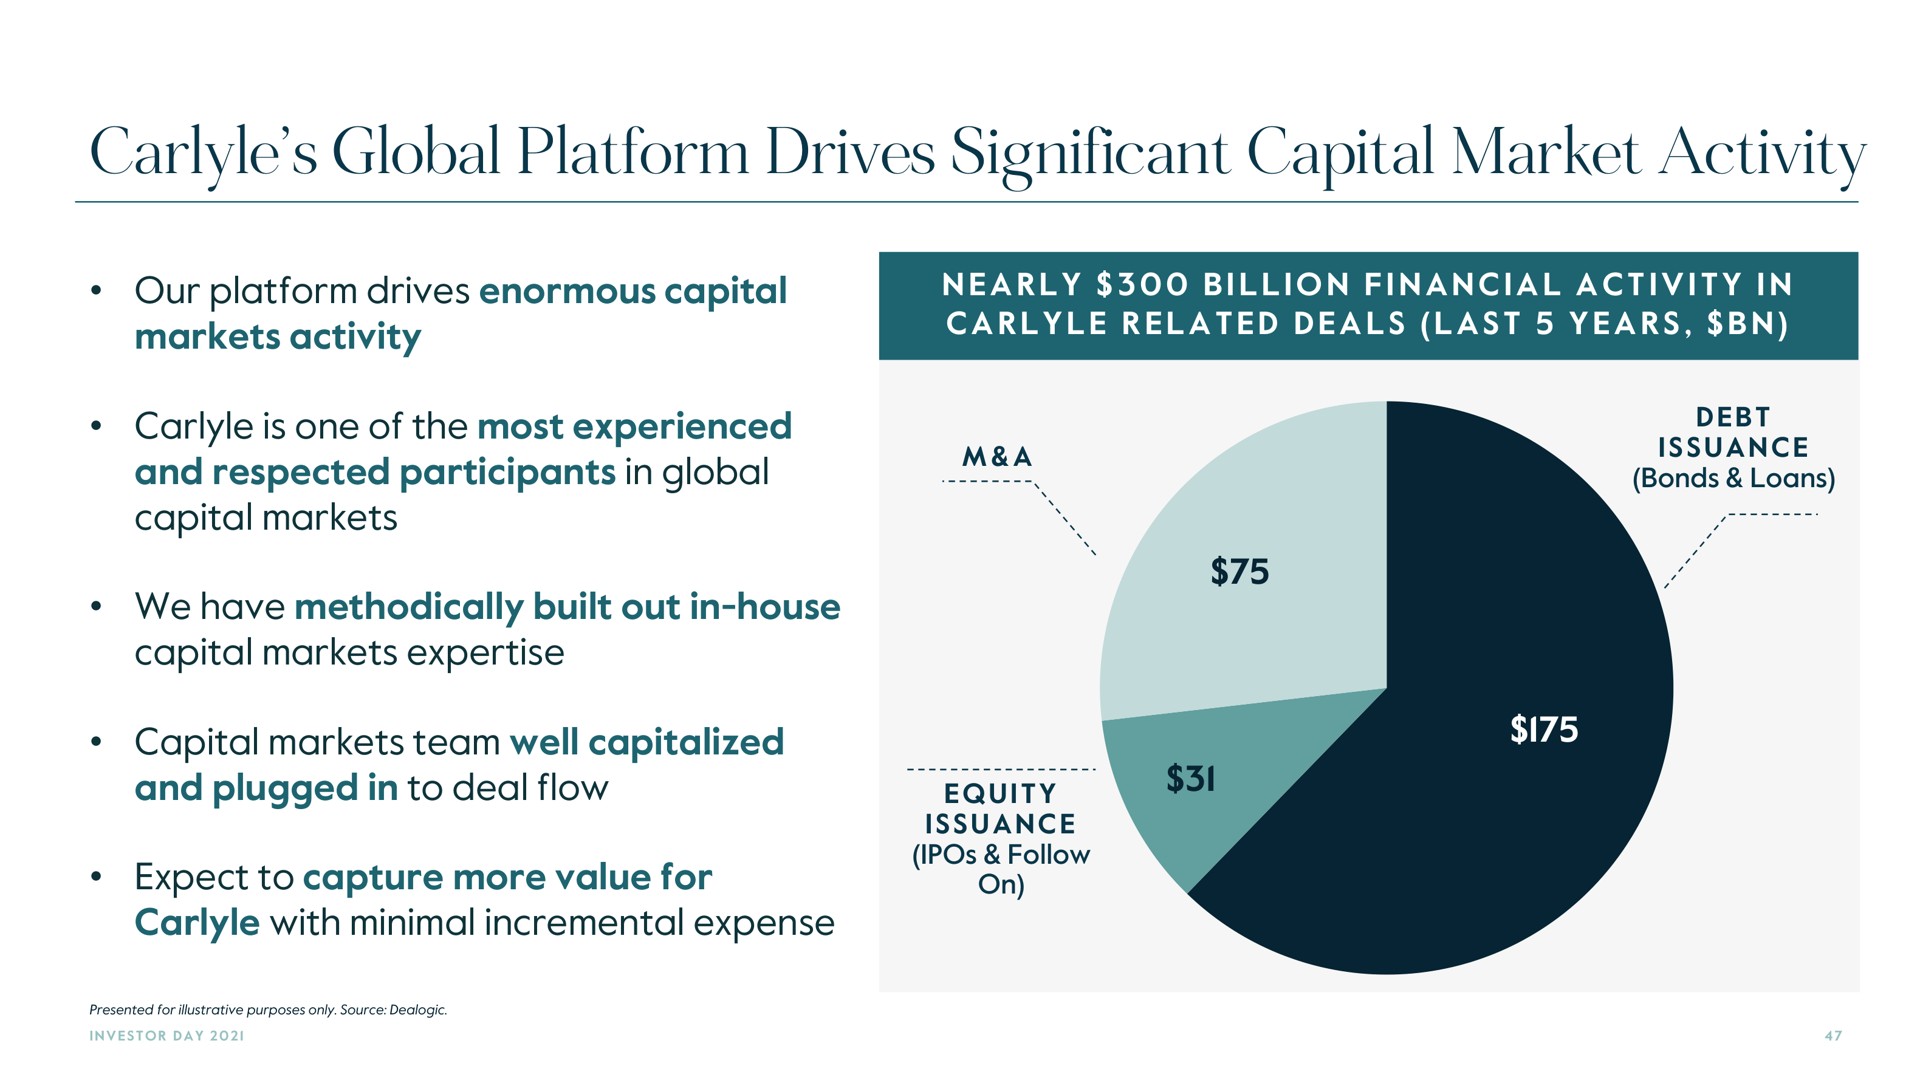 global platform drives significant capital market activity | Carlyle